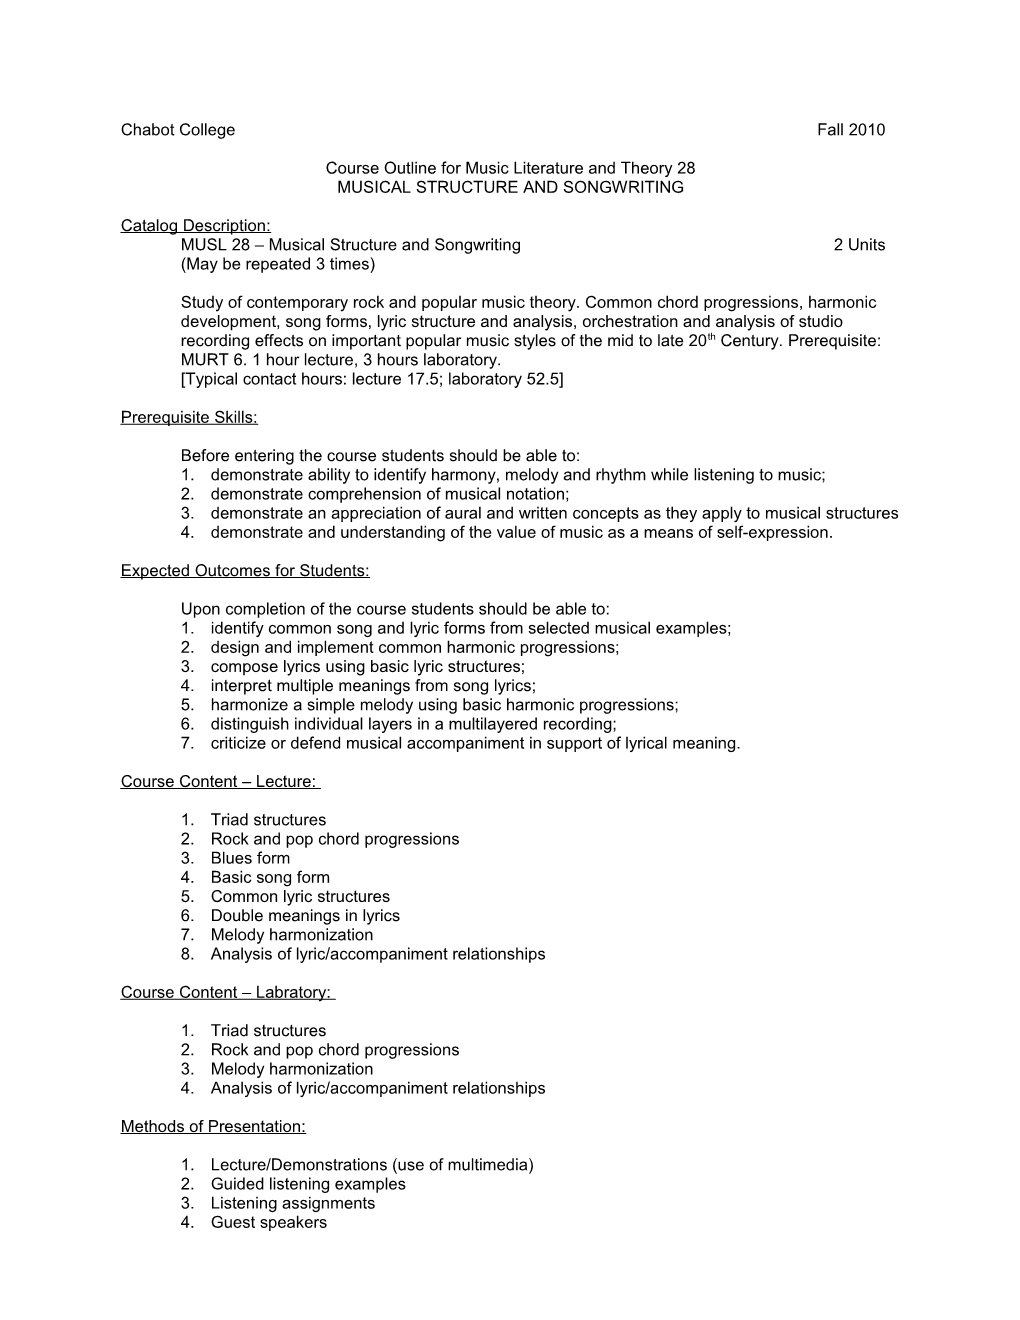 Course Outline for Music Literature and Theory 28, Page 1